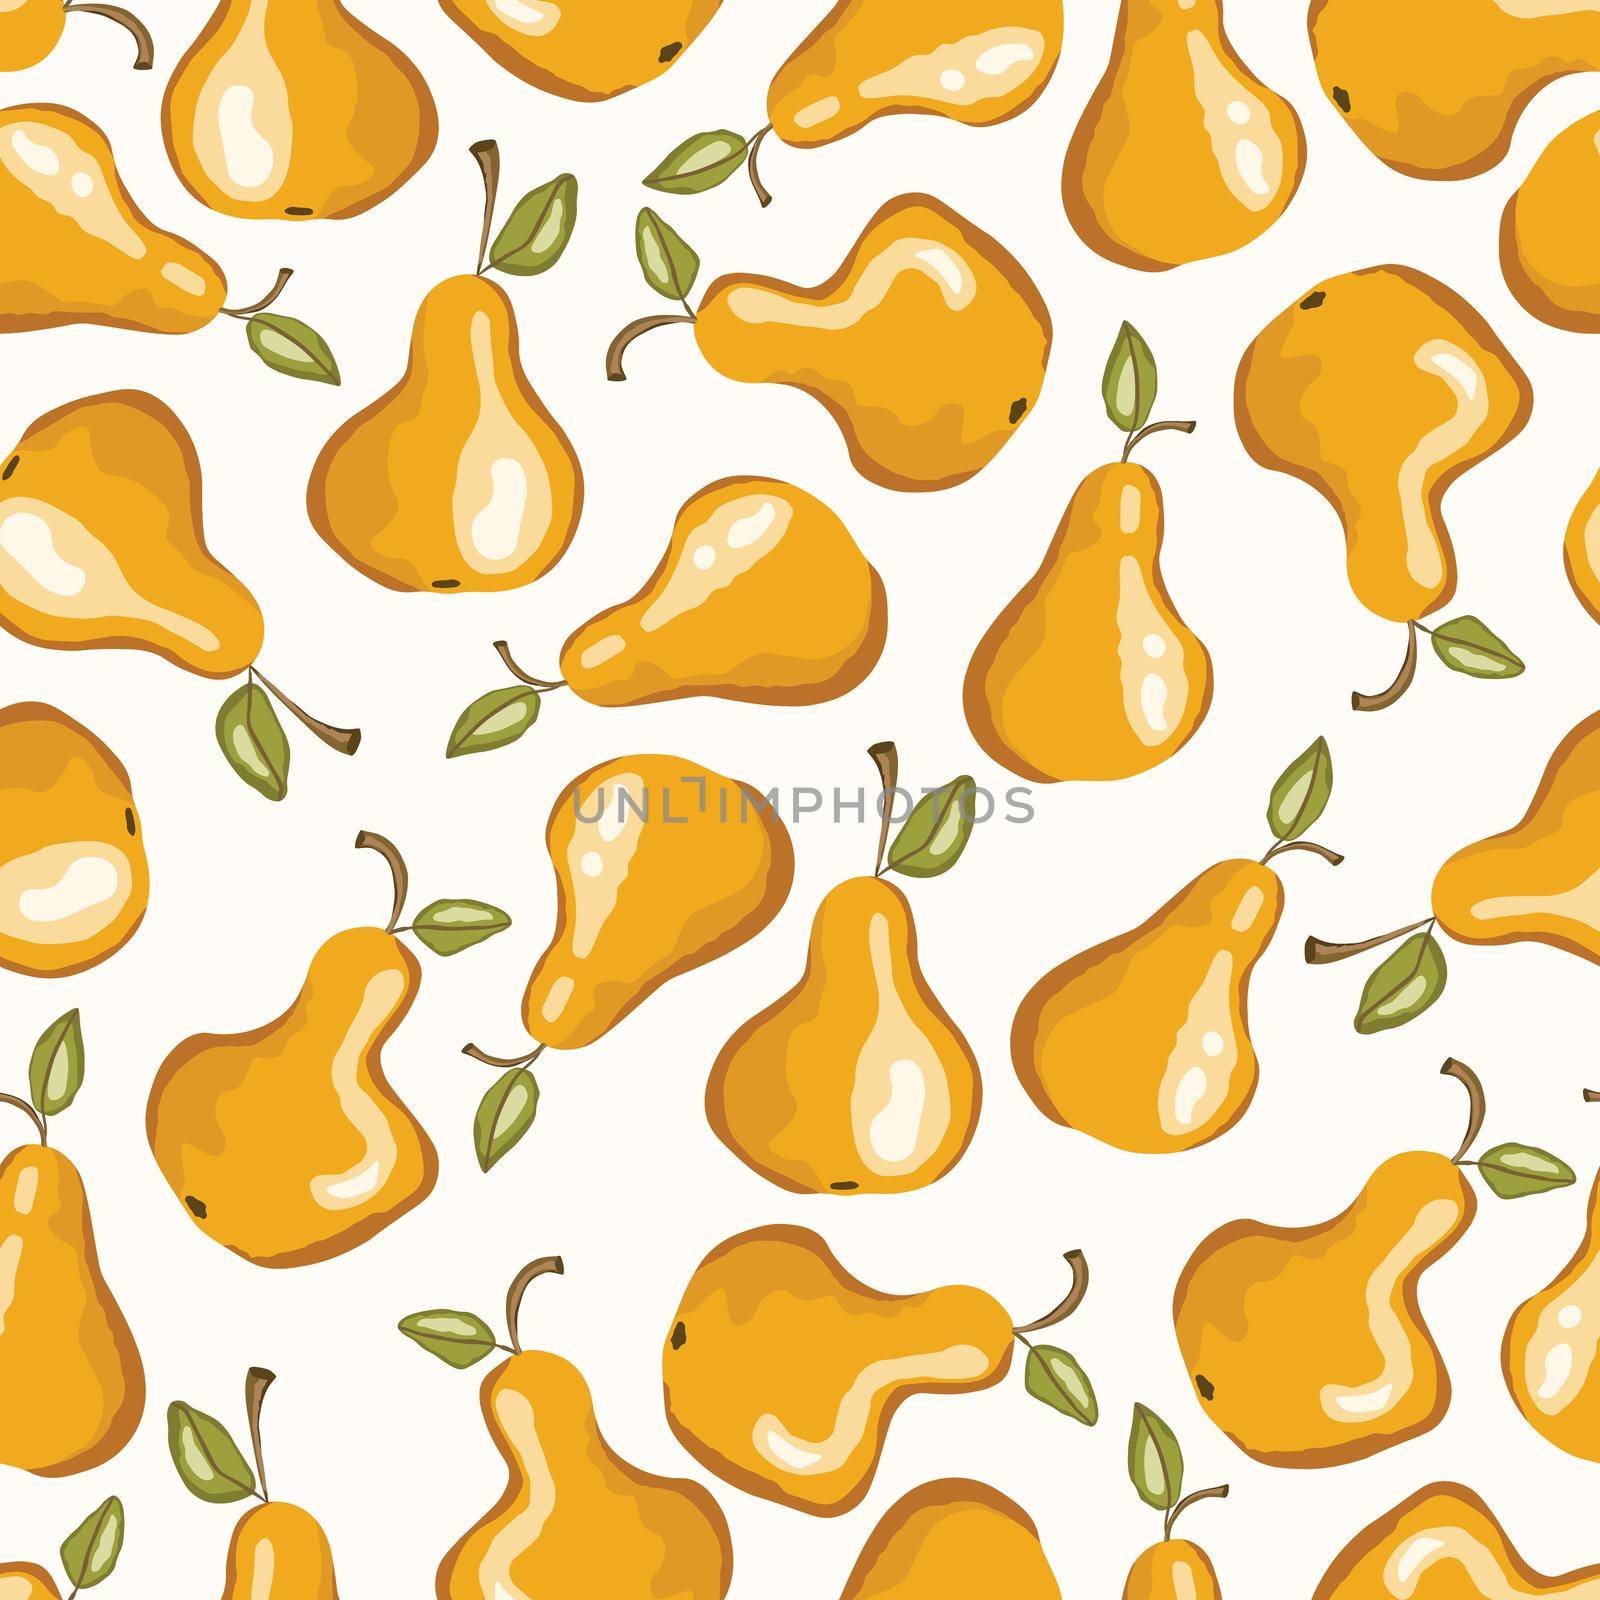 Seamless pattern with pear on white background. Natural delicious fresh ripe tasty fruit. Vector illustration for print, fabric, textile, banner, your design. Stylized pears with leaves. Food concept.